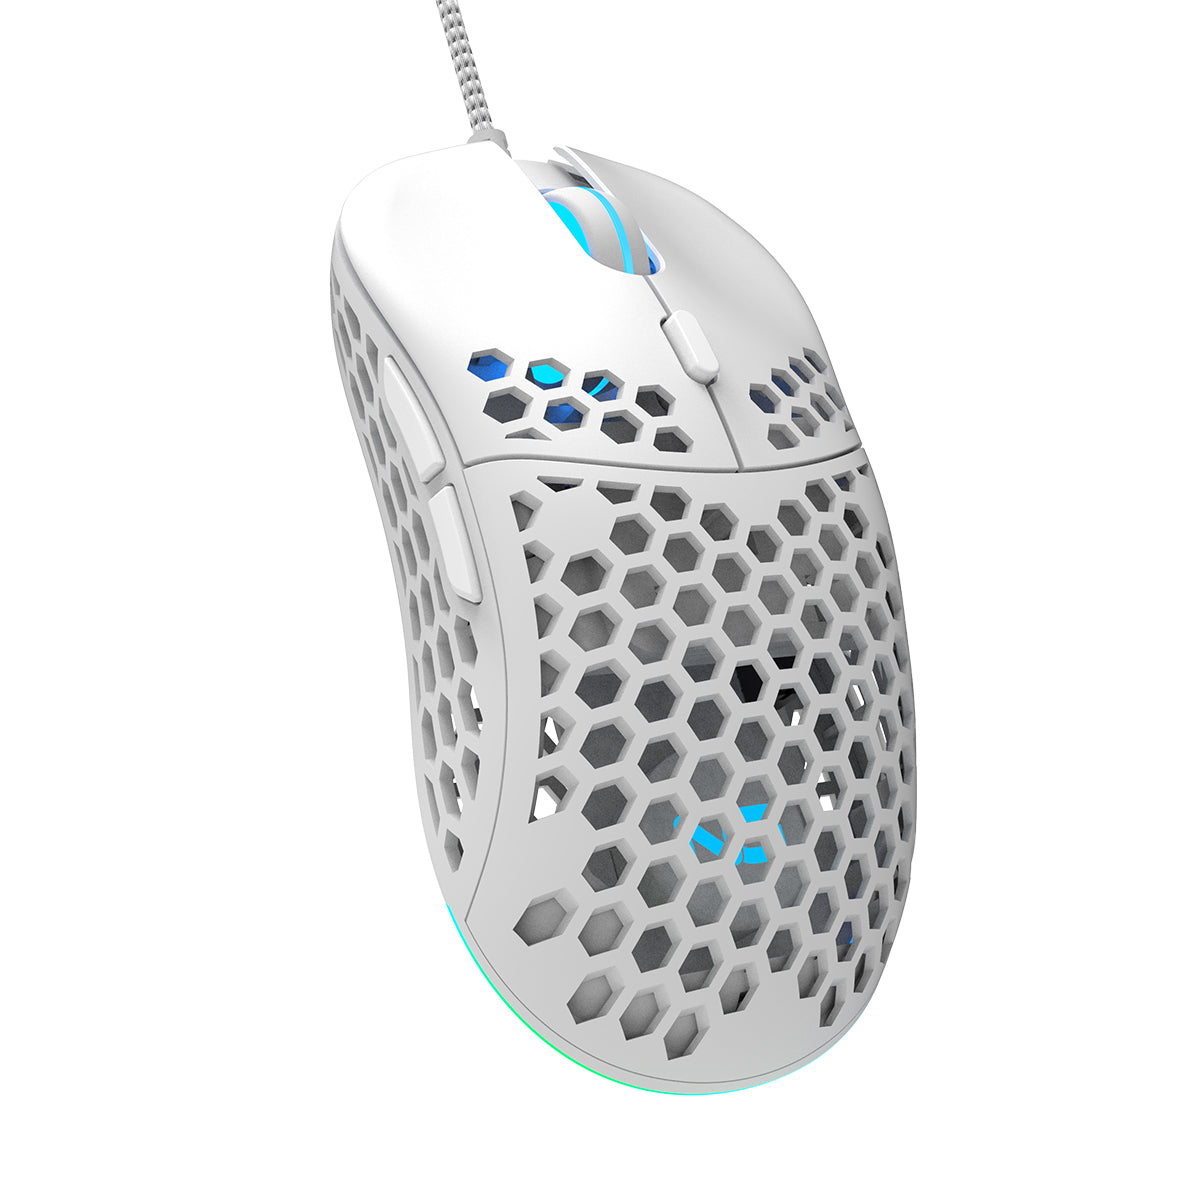 Nordic Gaming Vapour UltraLight Gaming mouse White